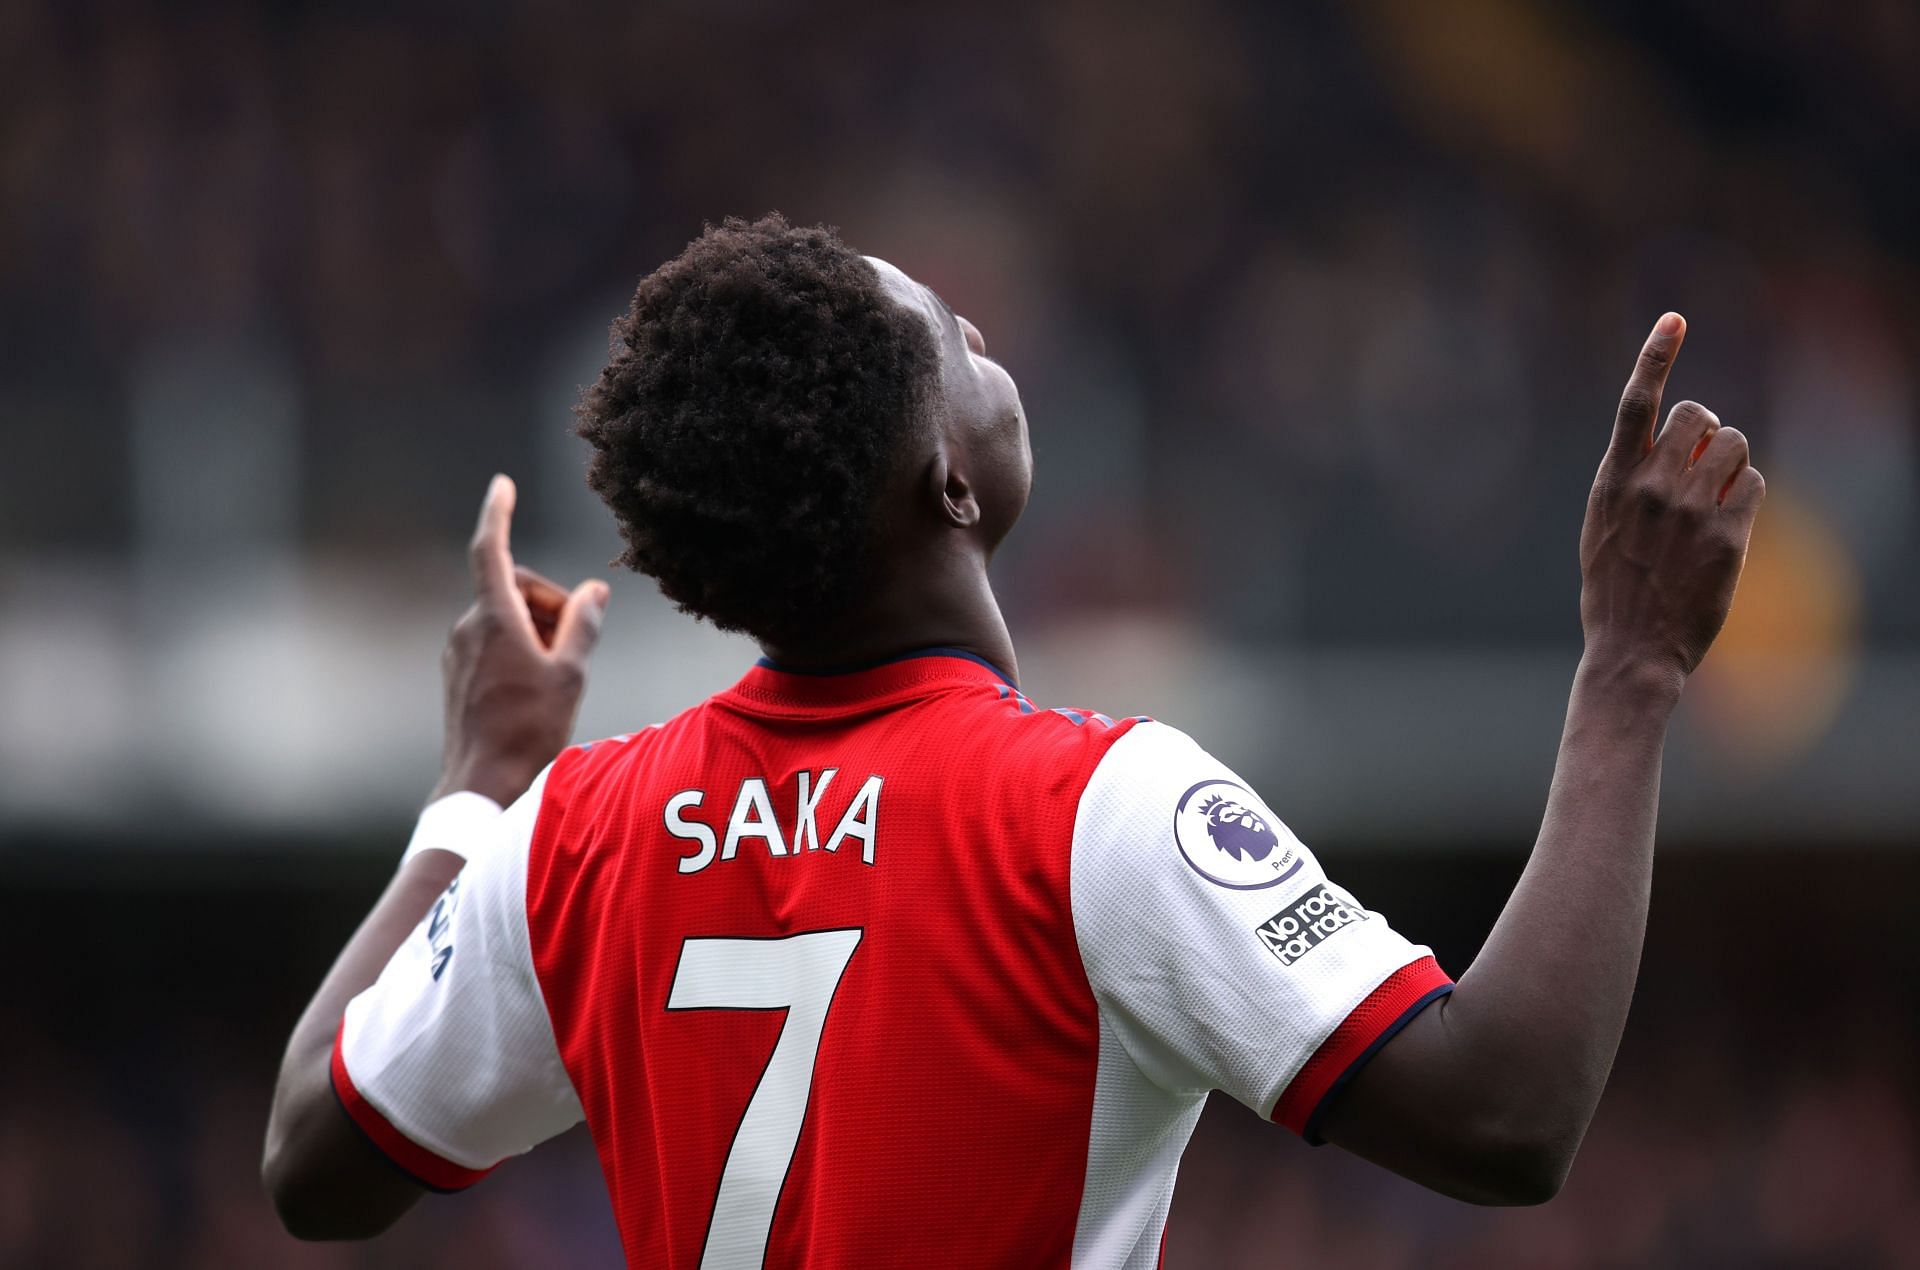 Saka has been in inspired form for Arsenal this season